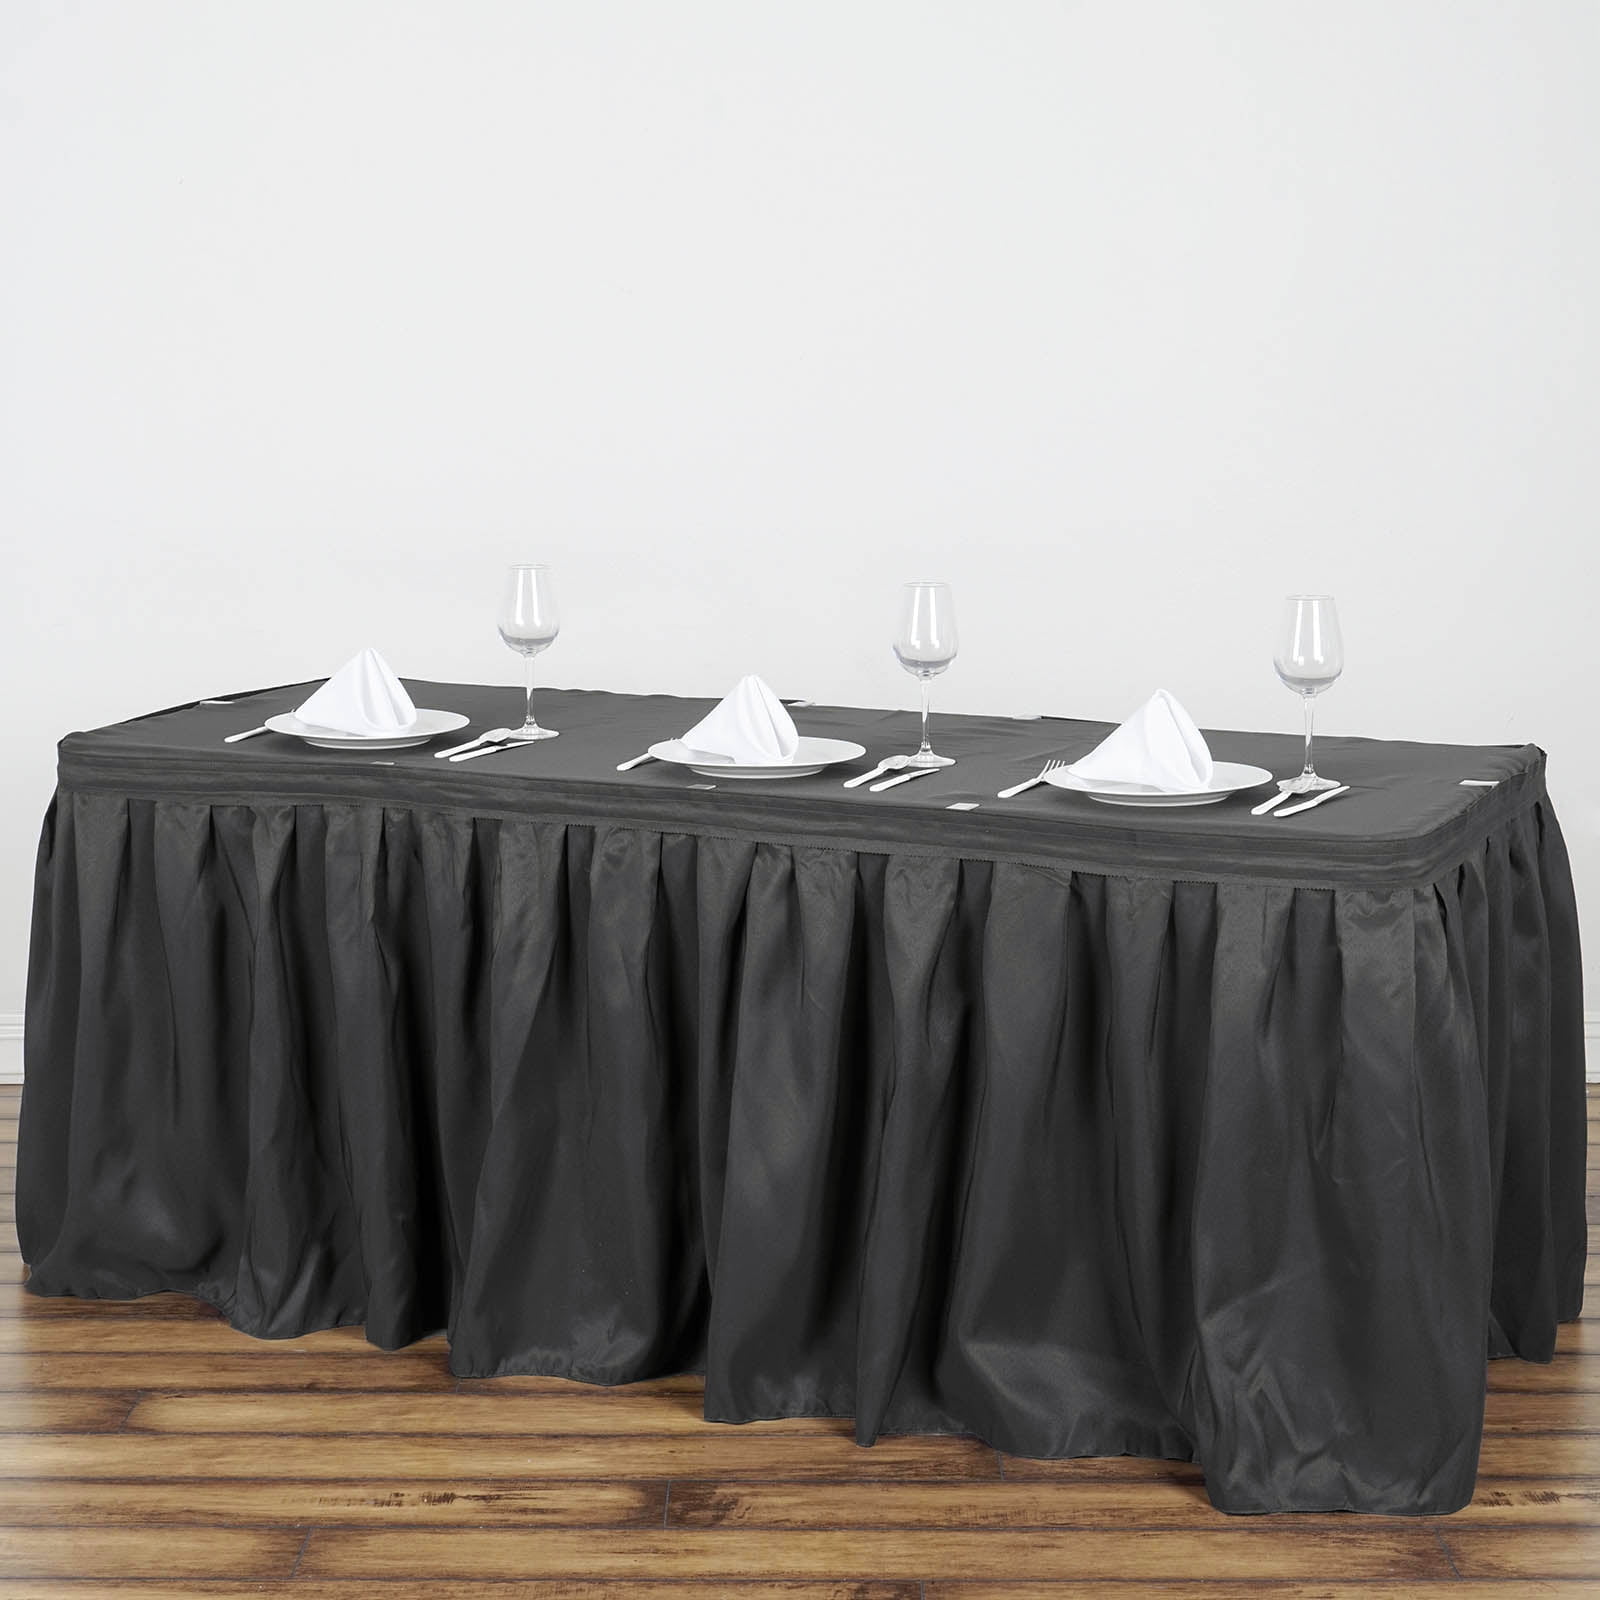 No Top 17 ft x 29" Table Skirt Banquet Wedding Party Linens Polyester BLACK 